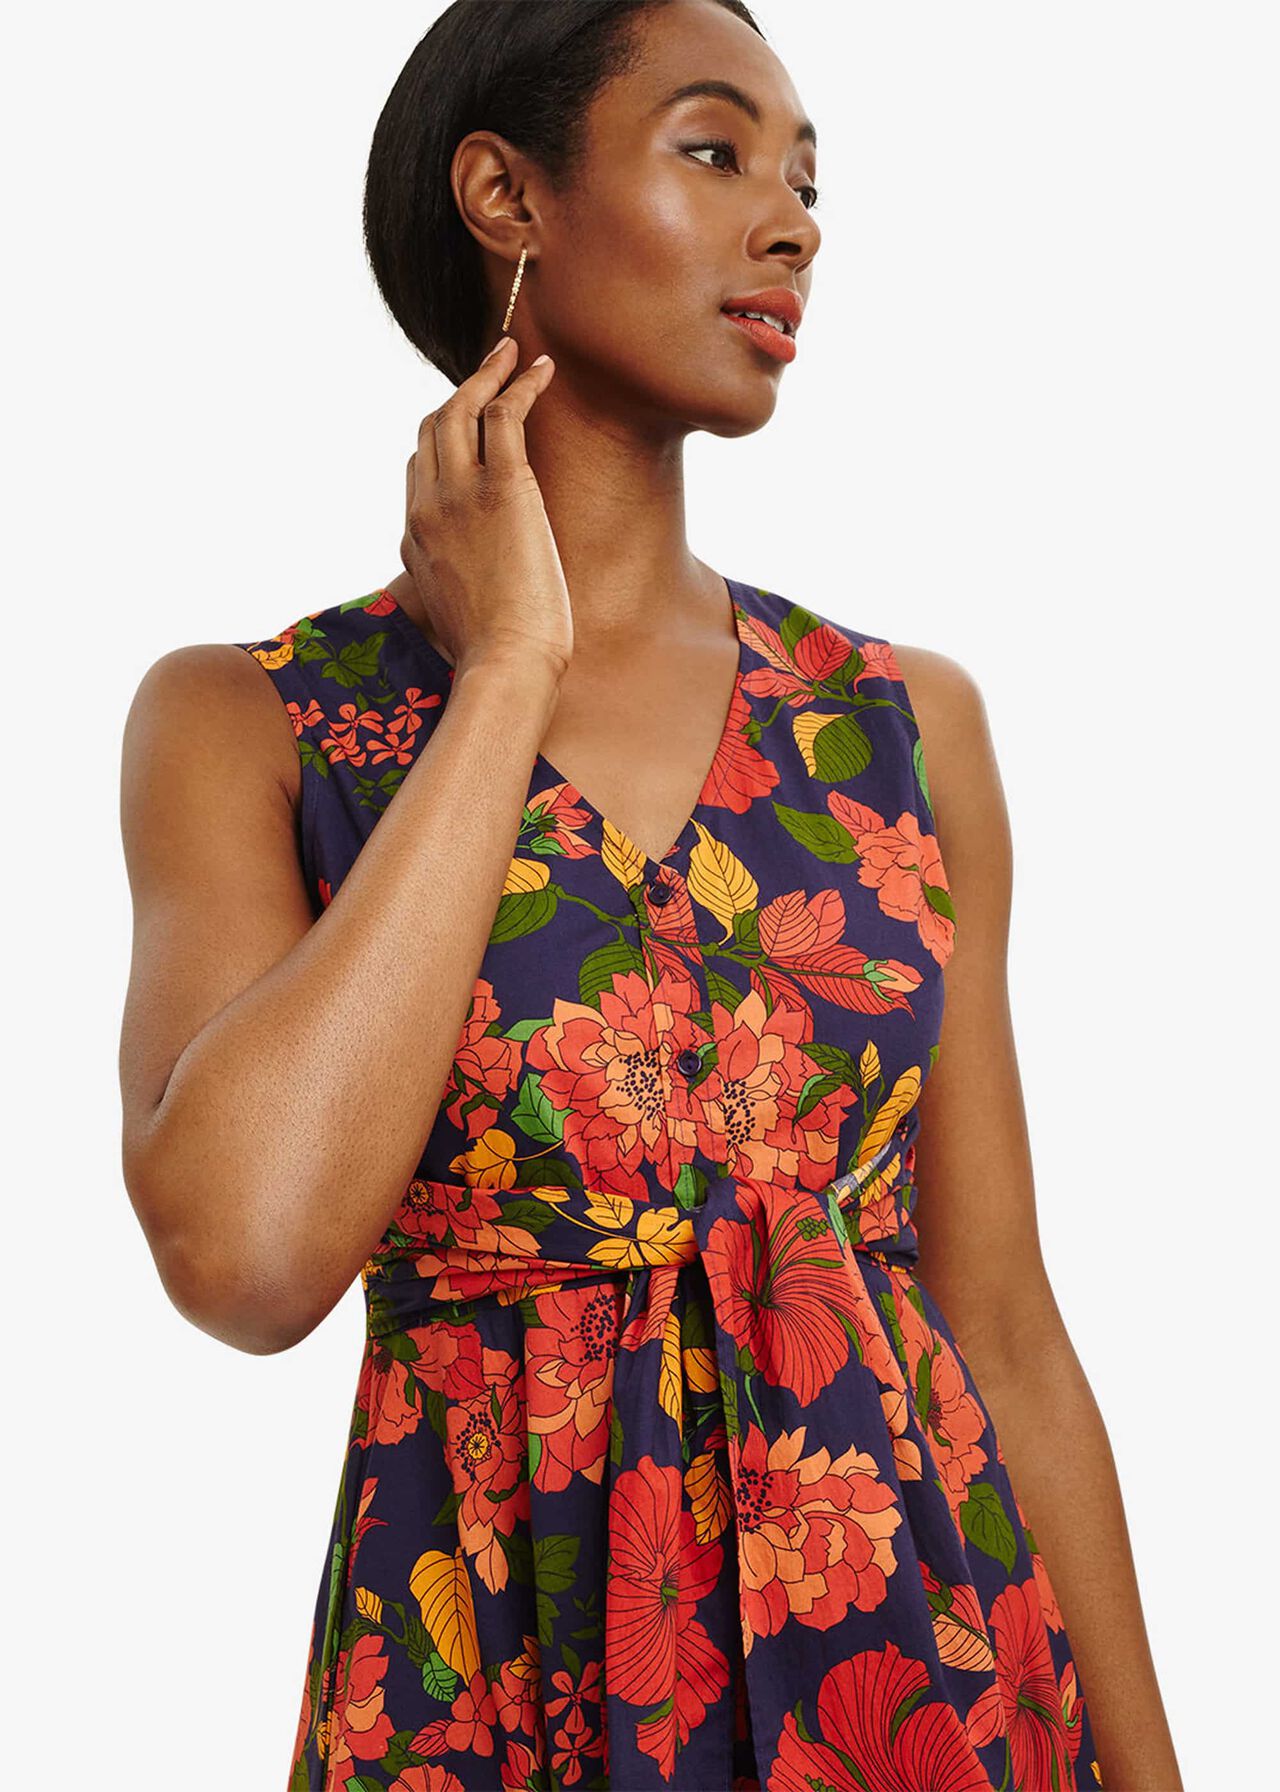 Cilla Floral Fit And Flare Dress